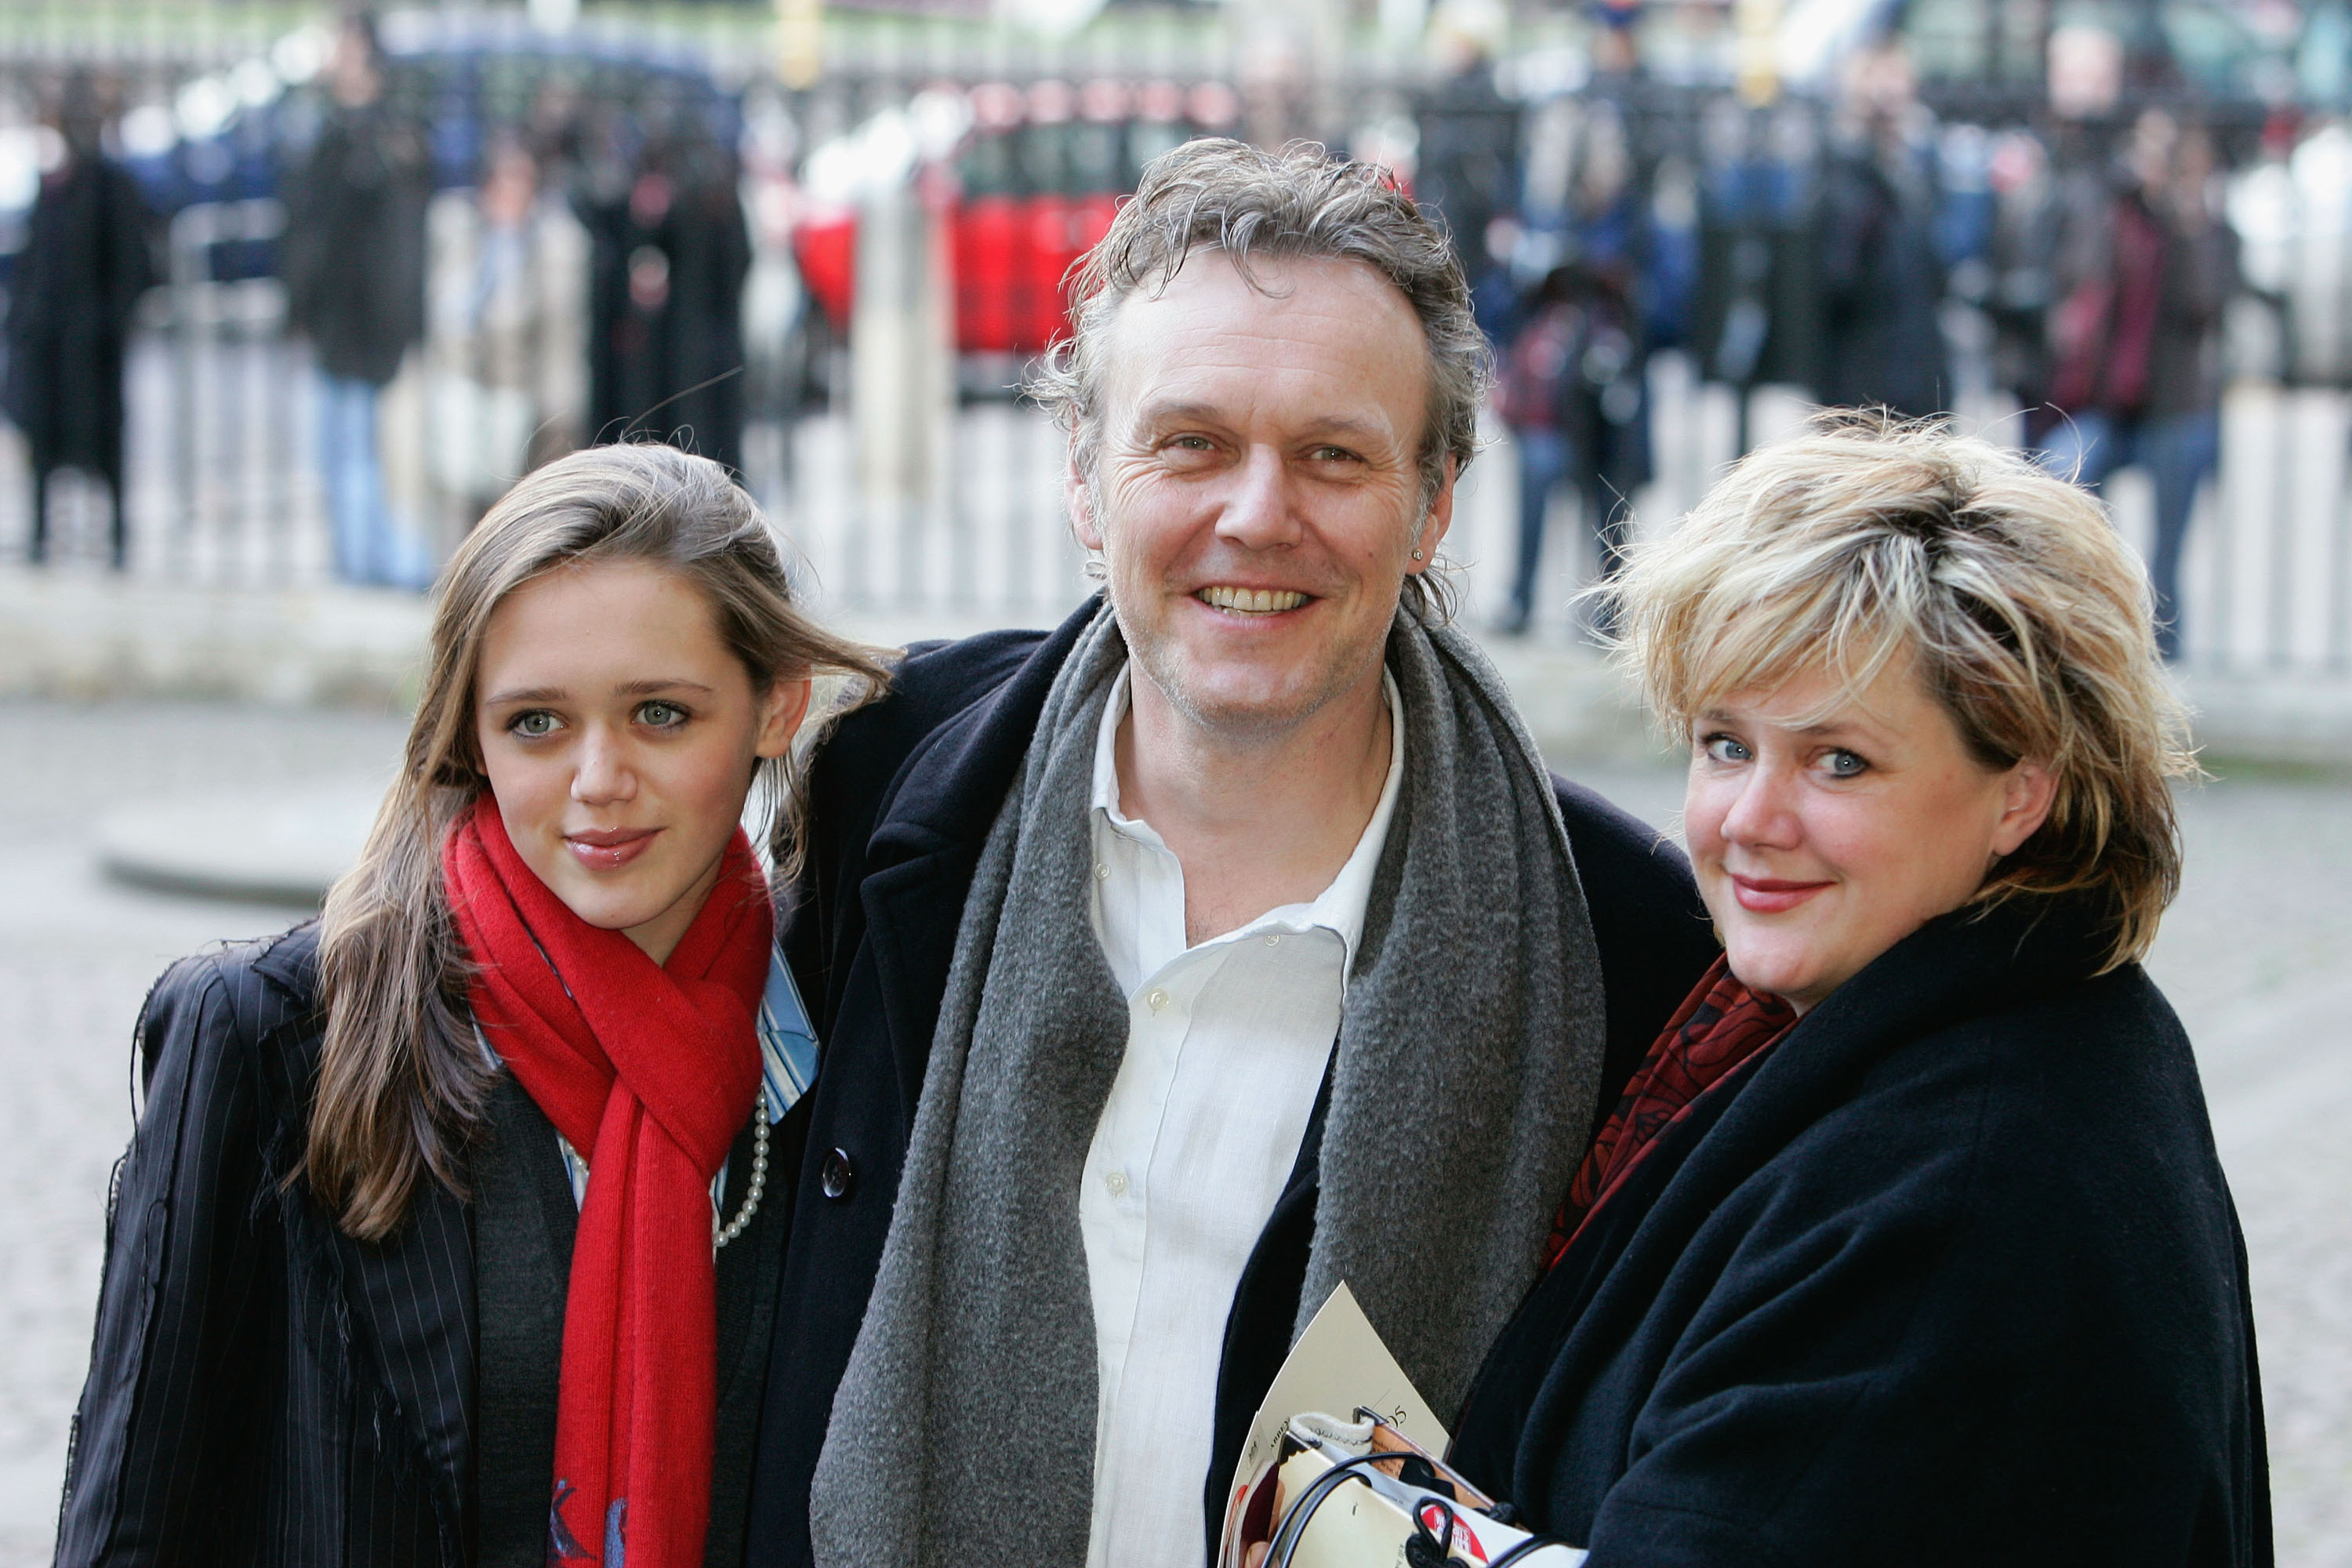 Anthony Head with his wife Sarah Fisher and daughter Daisy Head on December 14, 2005, in London, England. | Source: Getty Images